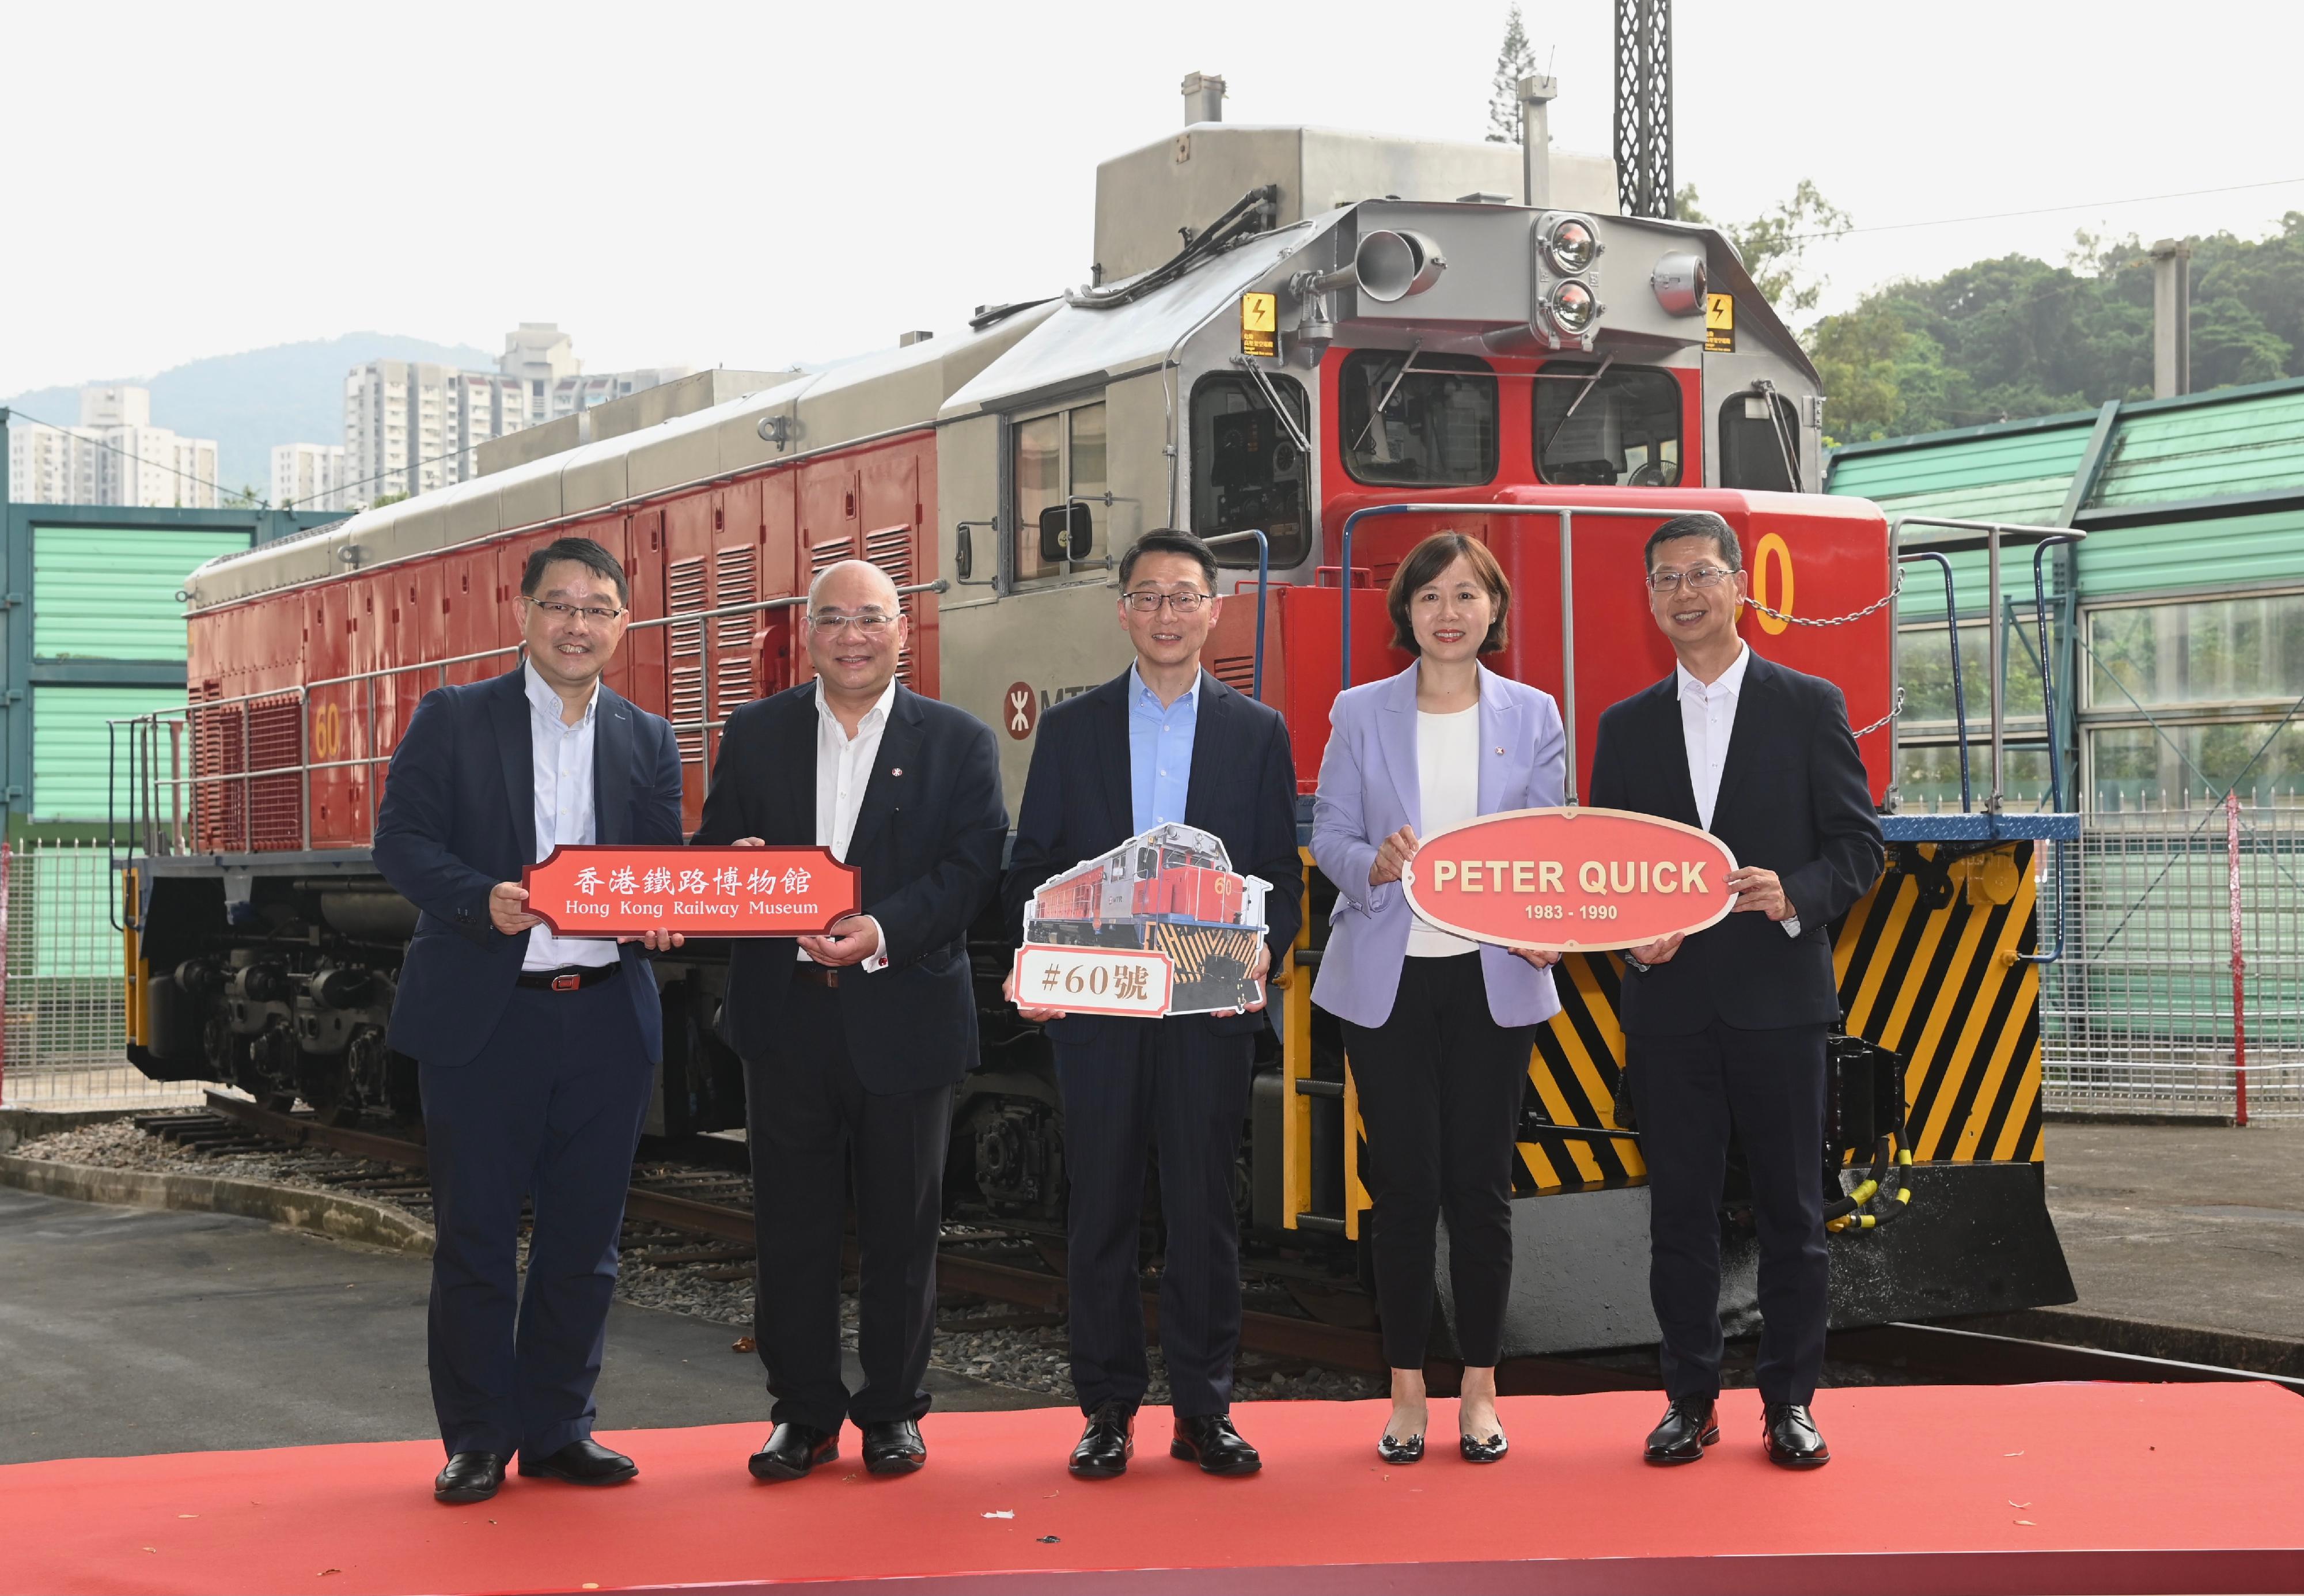 The handover ceremony of Diesel Electric Engine No. 60 (L60) was held today (October 3) at the Hong Kong Railway Museum. Photo shows officiating guests (from left) the Museum Director of the Hong Kong Heritage Museum, Mr Brian Lam; the Operations and Innovation Director of the MTR Corporation Limited (MTRC), Dr Tony Lee; the Director of Leisure and Cultural Services, Mr Vincent Liu; the Managing Director - Hong Kong Transport Services of the MTRC, Ms Jeny Yeung; and the Company Secretary of the Kowloon-Canton Railway Corporation, Mr C L Wong, at the ceremony.